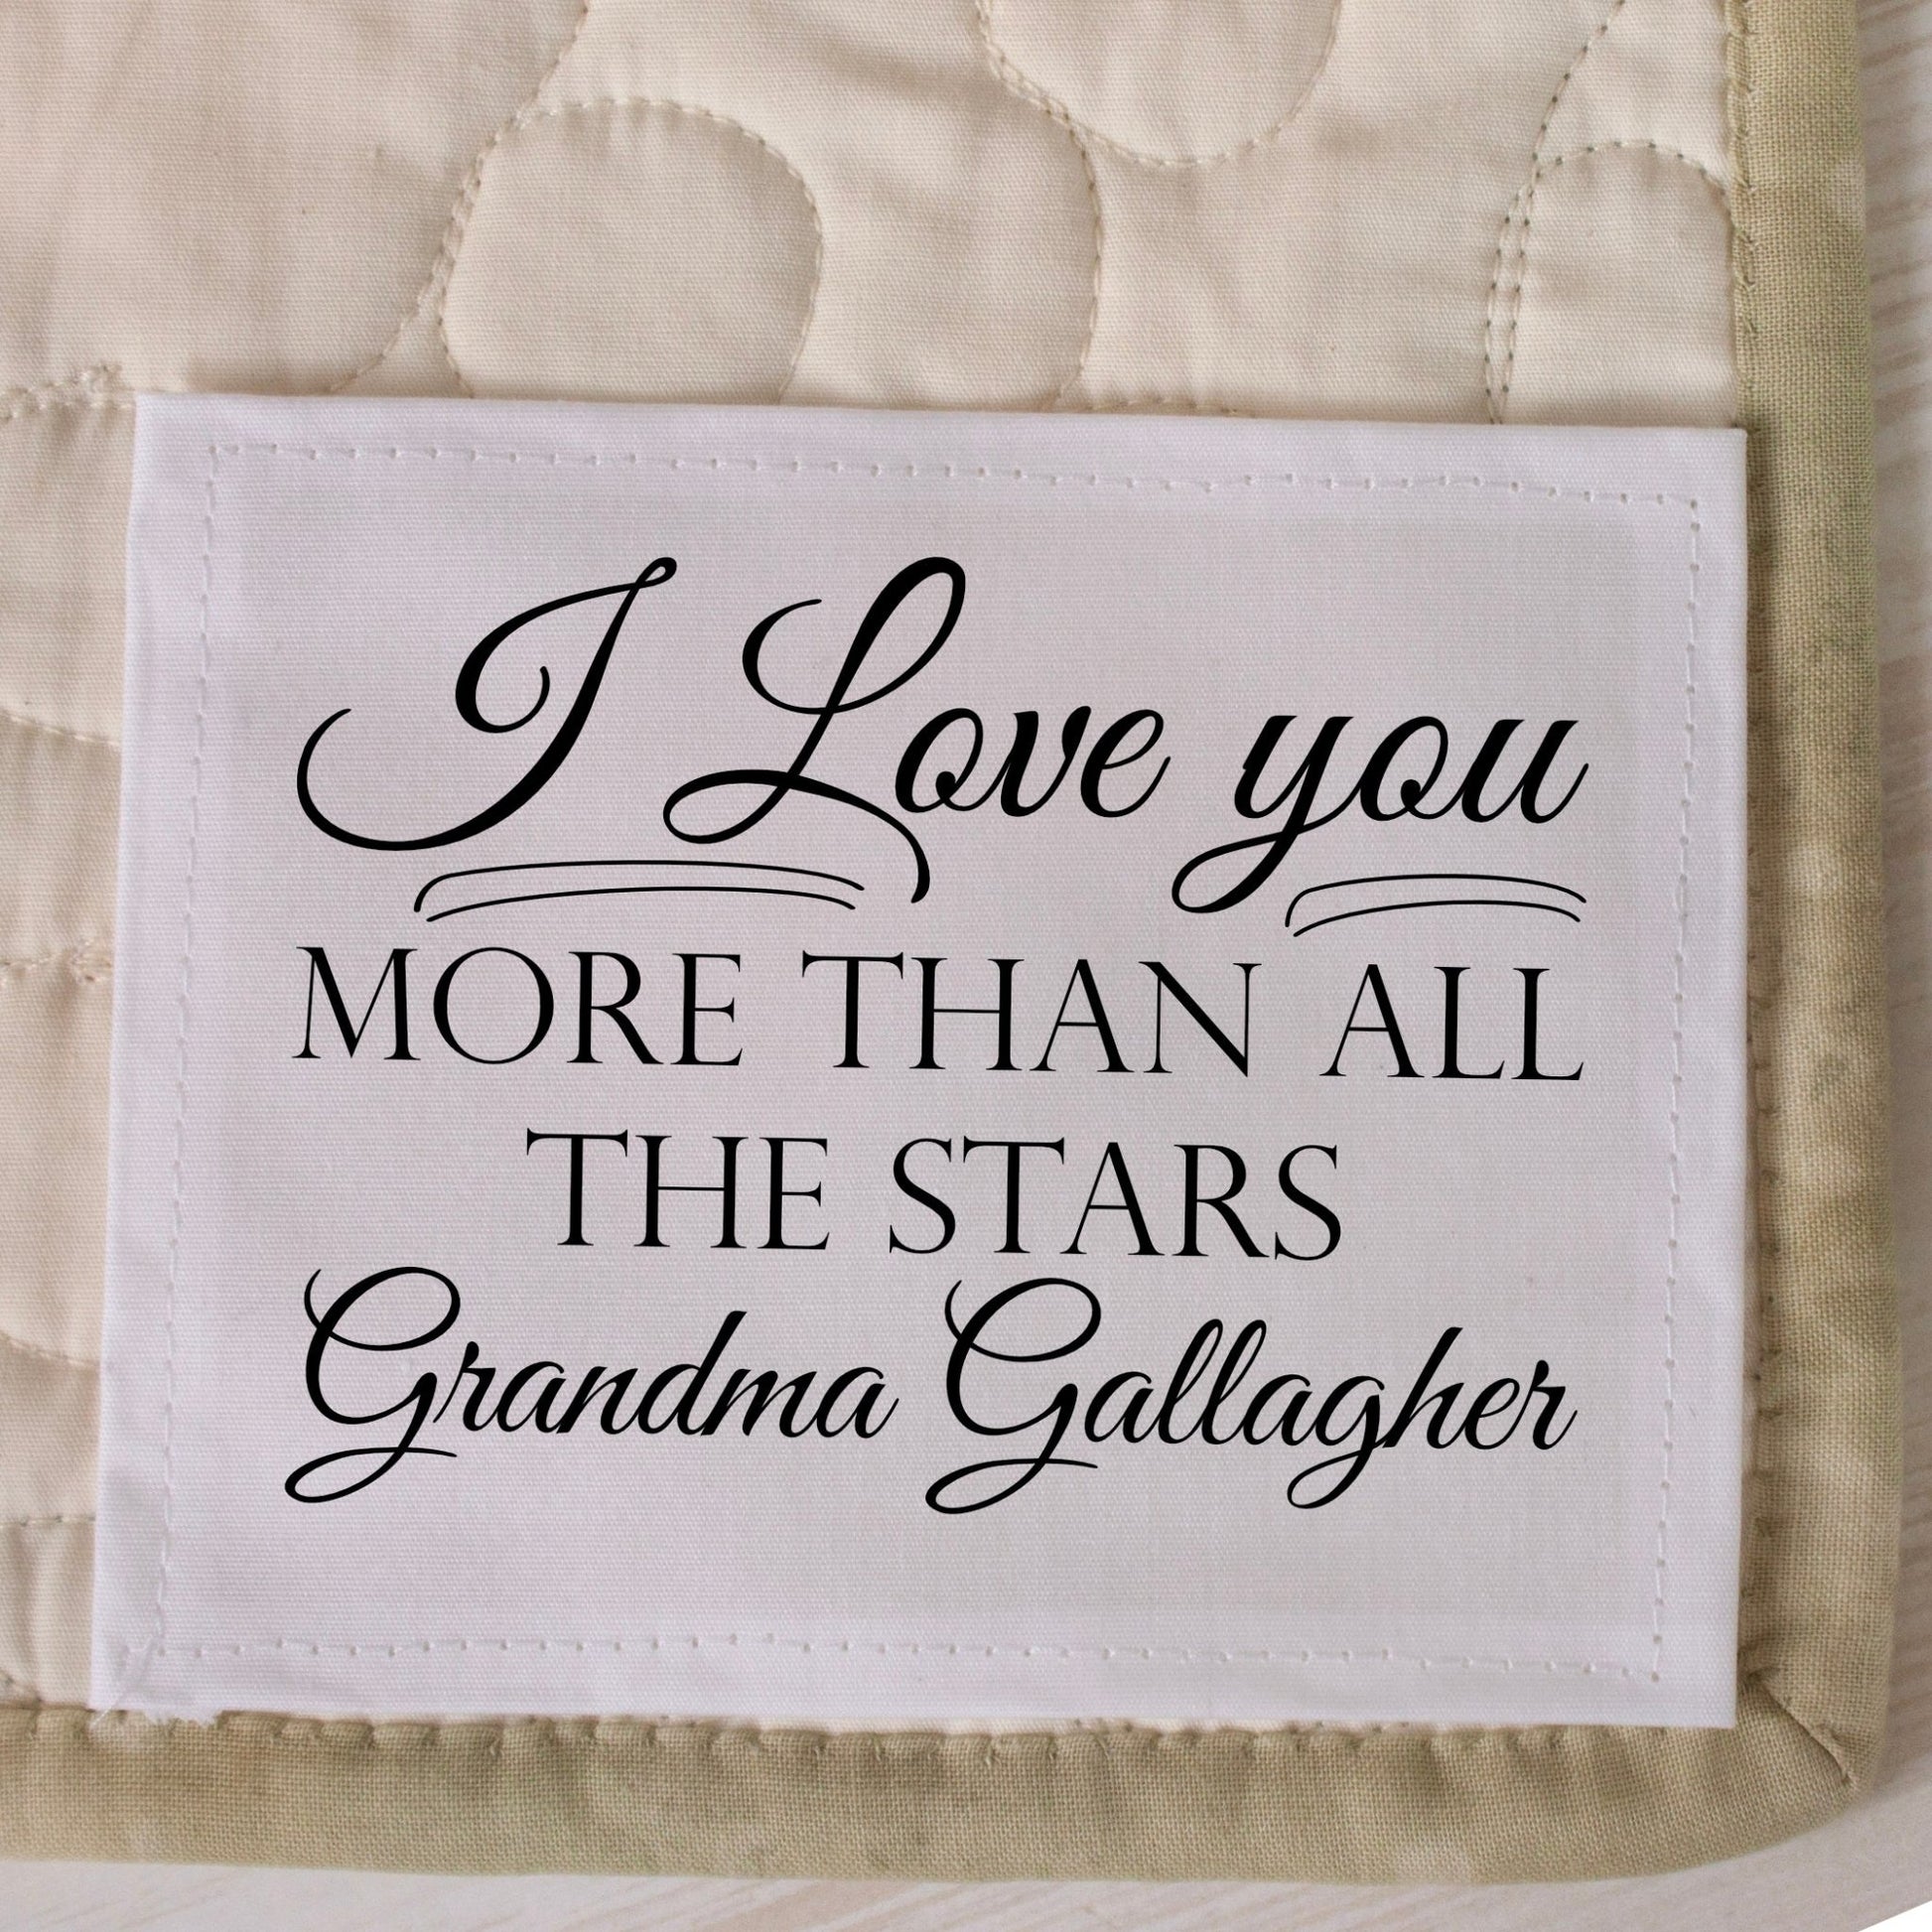 I Love You More than All the Stars. Sweet personalized quilt labels - Jammin Threads